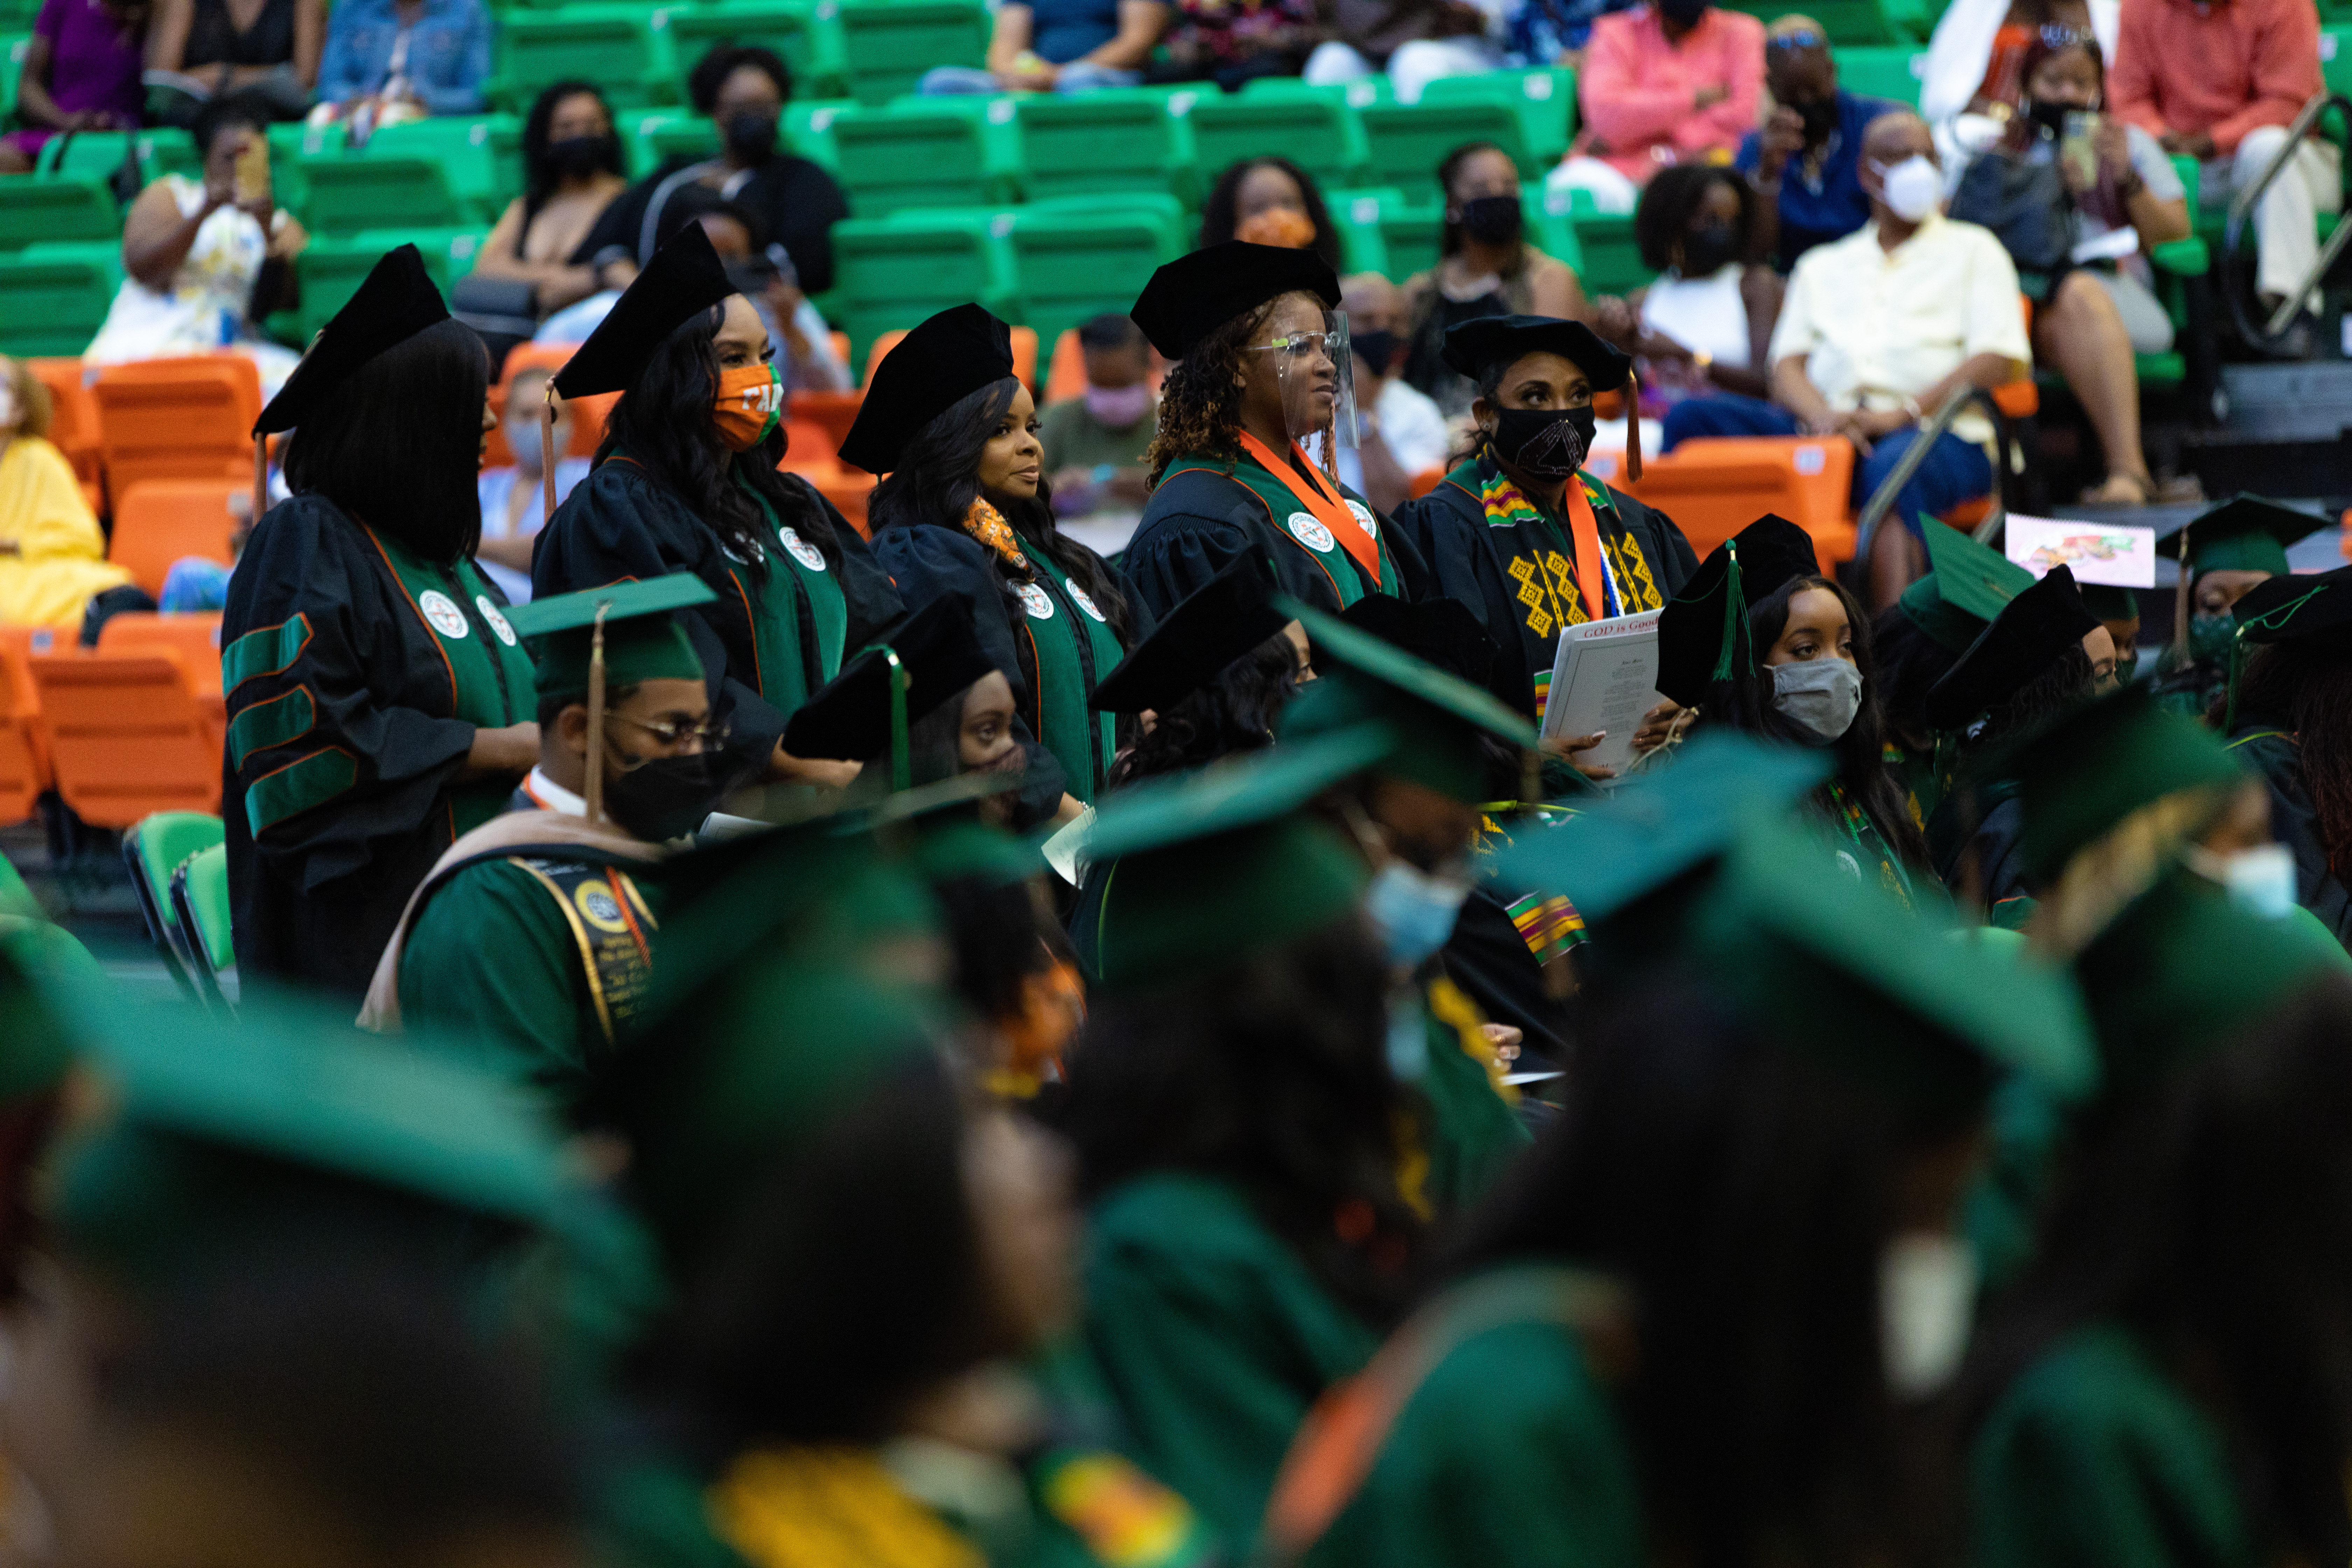 Clear Bag Policy for Commencement - FAMU Forward